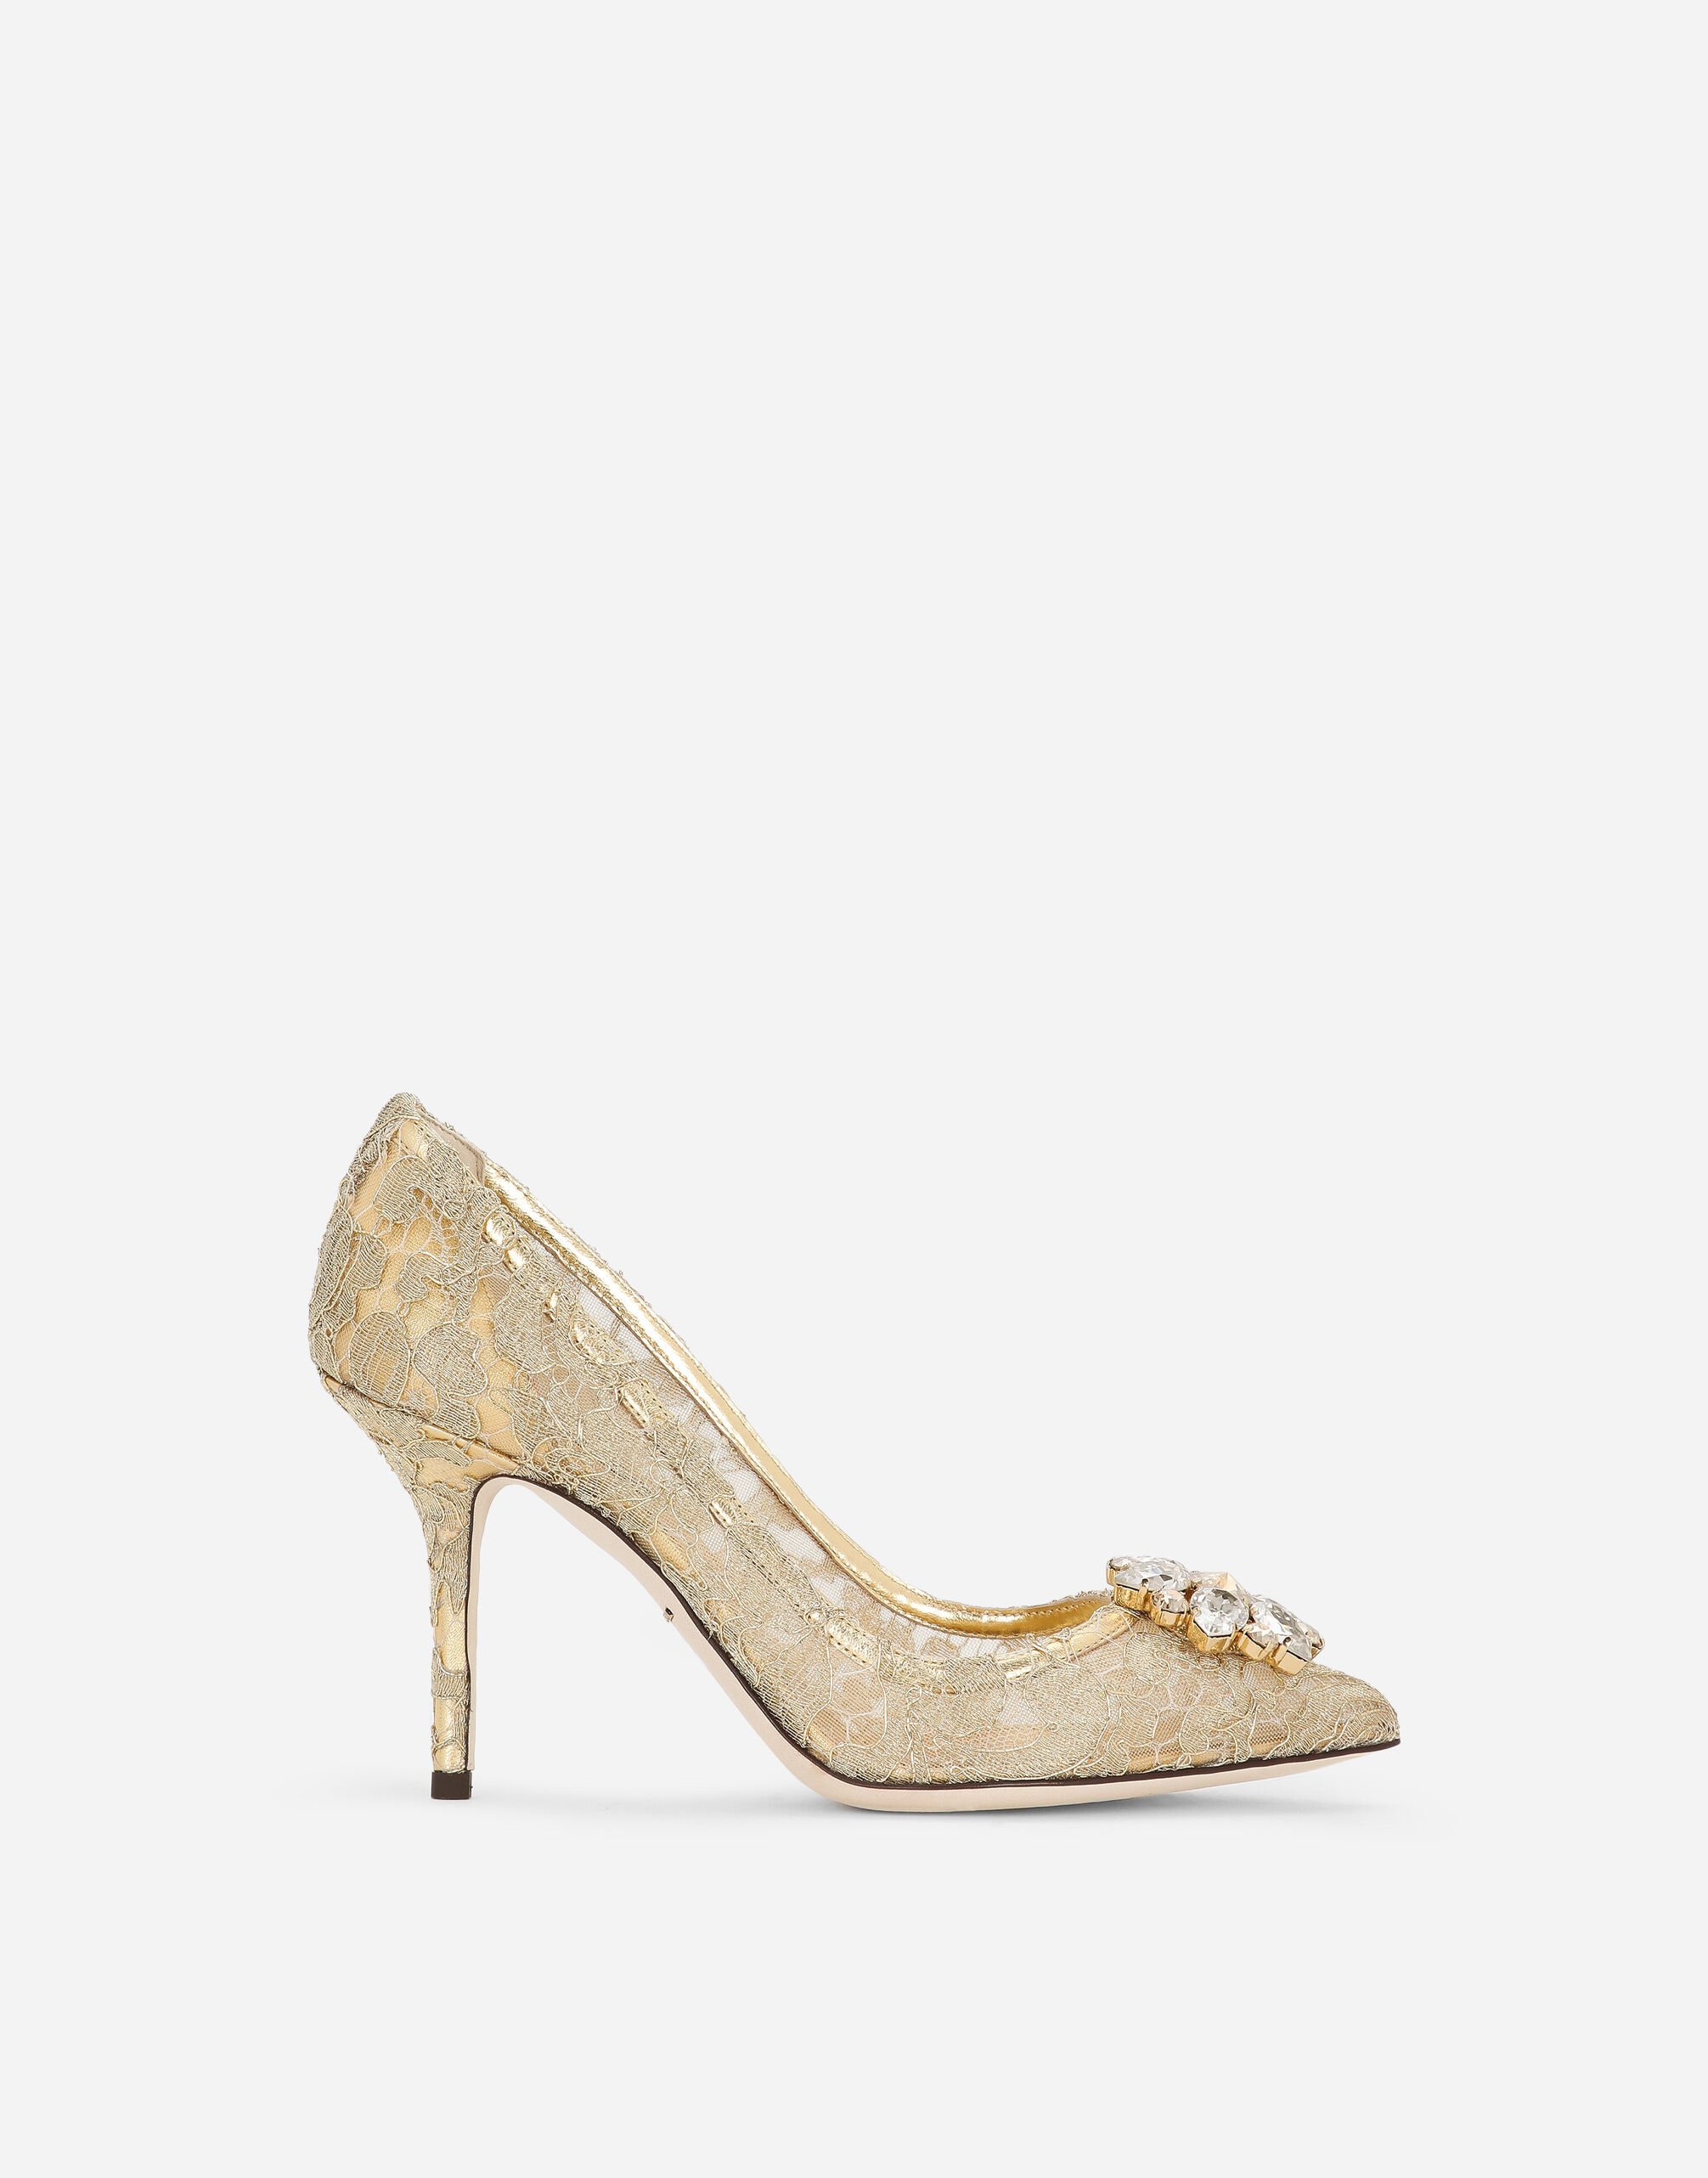 Dolce & Gabbana Lurex lace rainbow pumps with brooch detailing White/Pink CK1791AX589